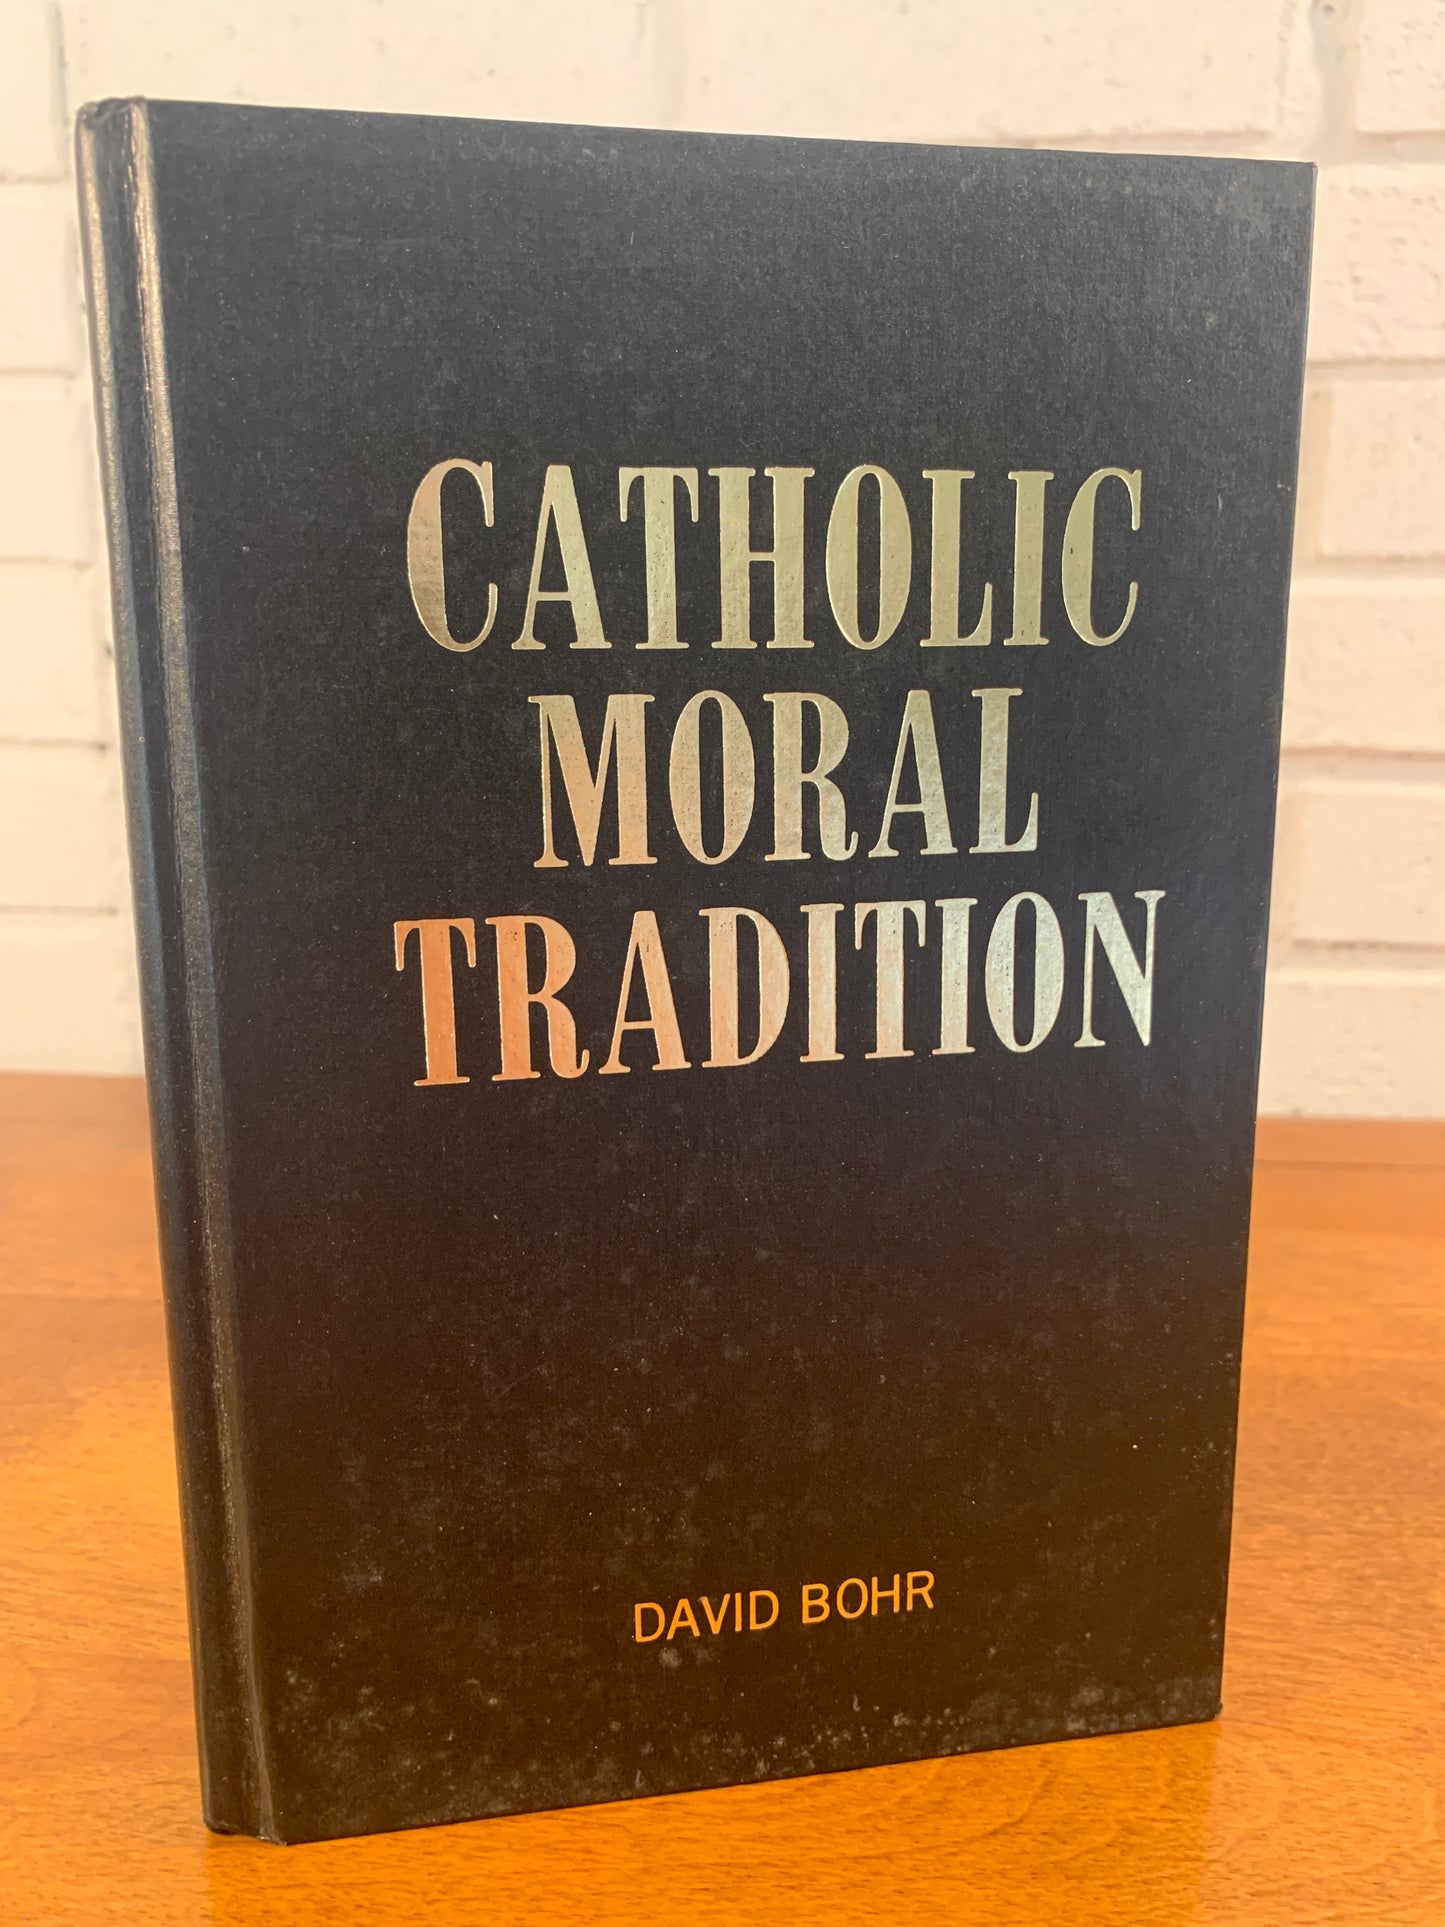 Catholic Moral Tradition, In Christ A New Creation by David Bohr [1990]